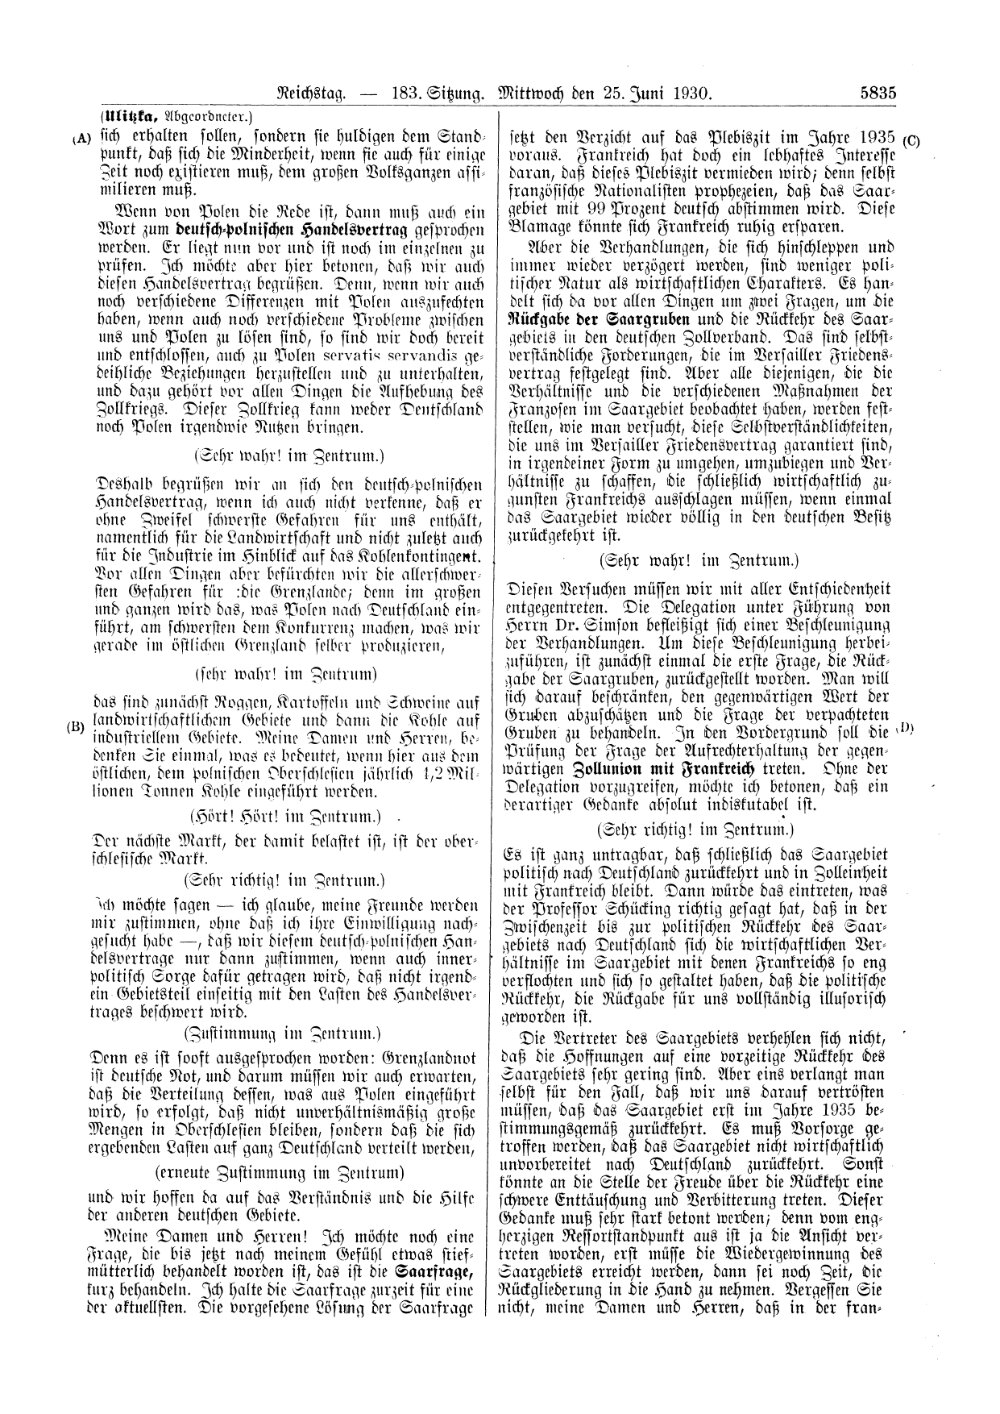 Scan of page 5835